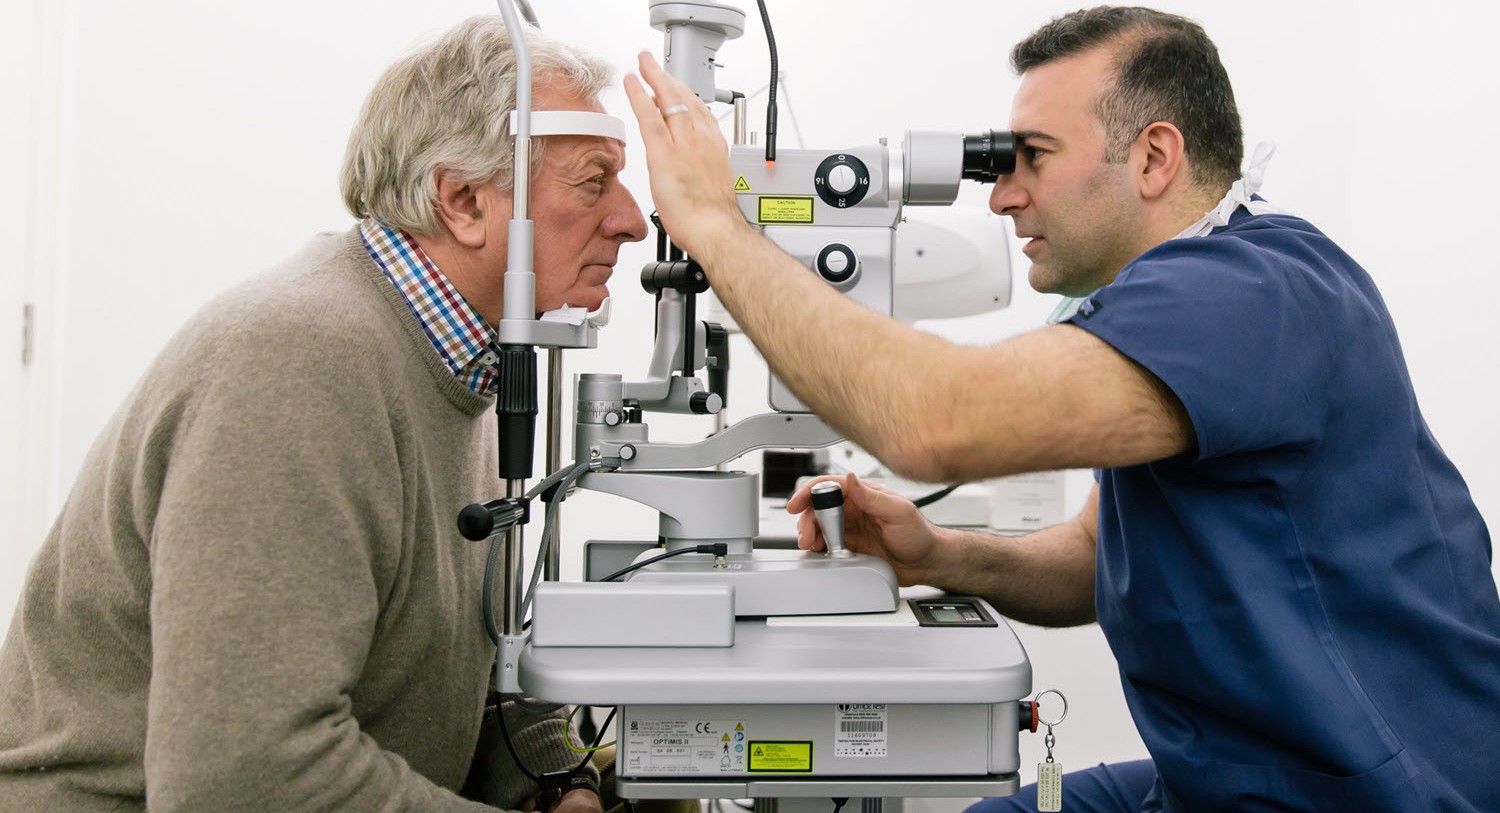 Reasons why you might not be a candidate for laser eye surgery